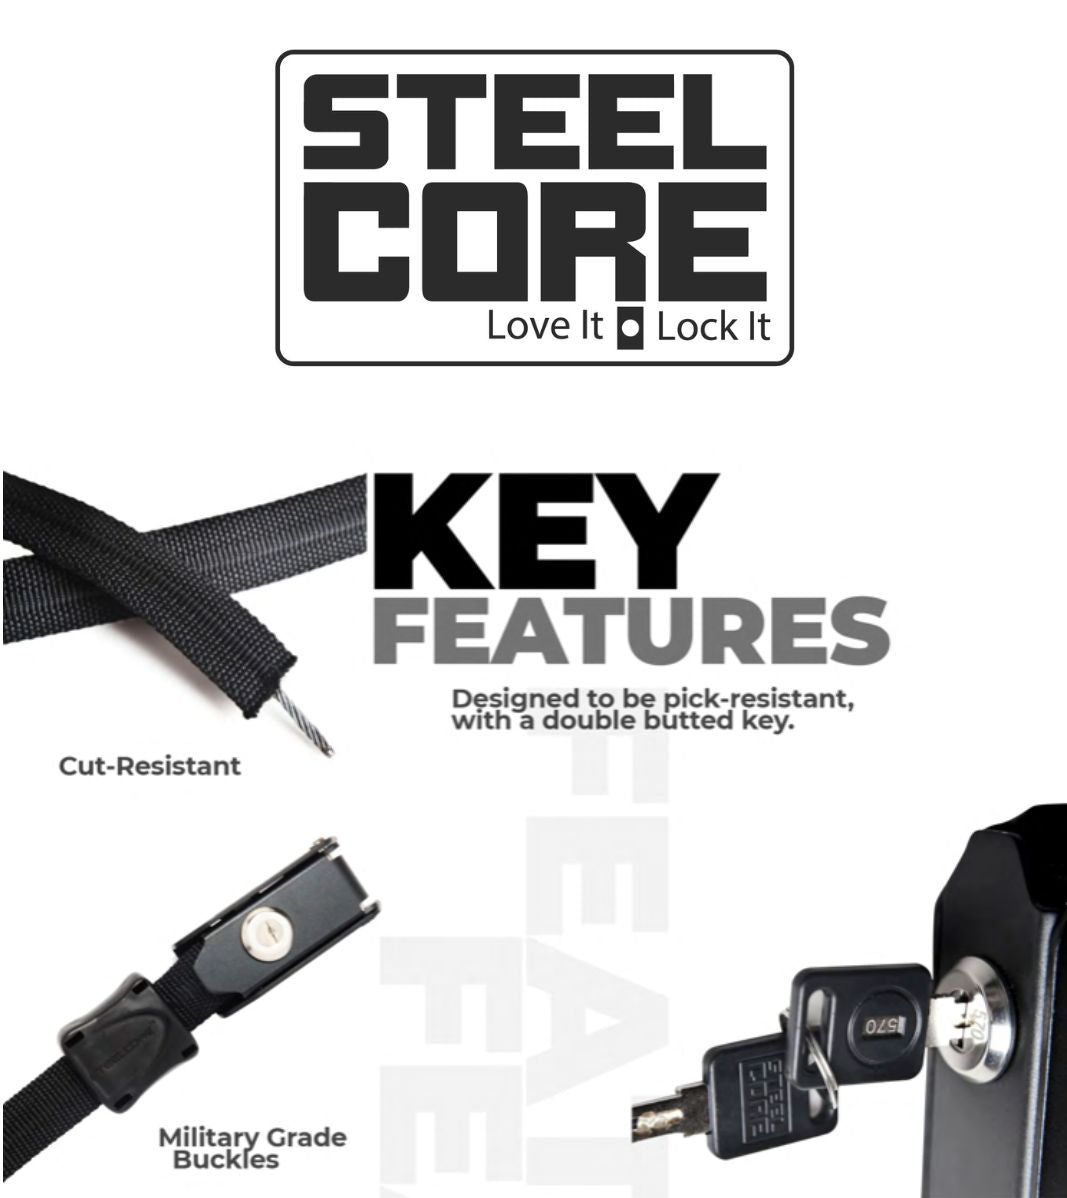 Steelcore Soft Chain, SCB-8, locking straps, locks, security, steelcore, Accessories - Steelcore Theft Resistant Locking Security Straps are ideal for securing your assets including bikes, motorcycles, surfboards, coolers, sporting goods, tools, and more. - Imported and distributed in North &amp; South America by Lindeco Genuine Powersports.